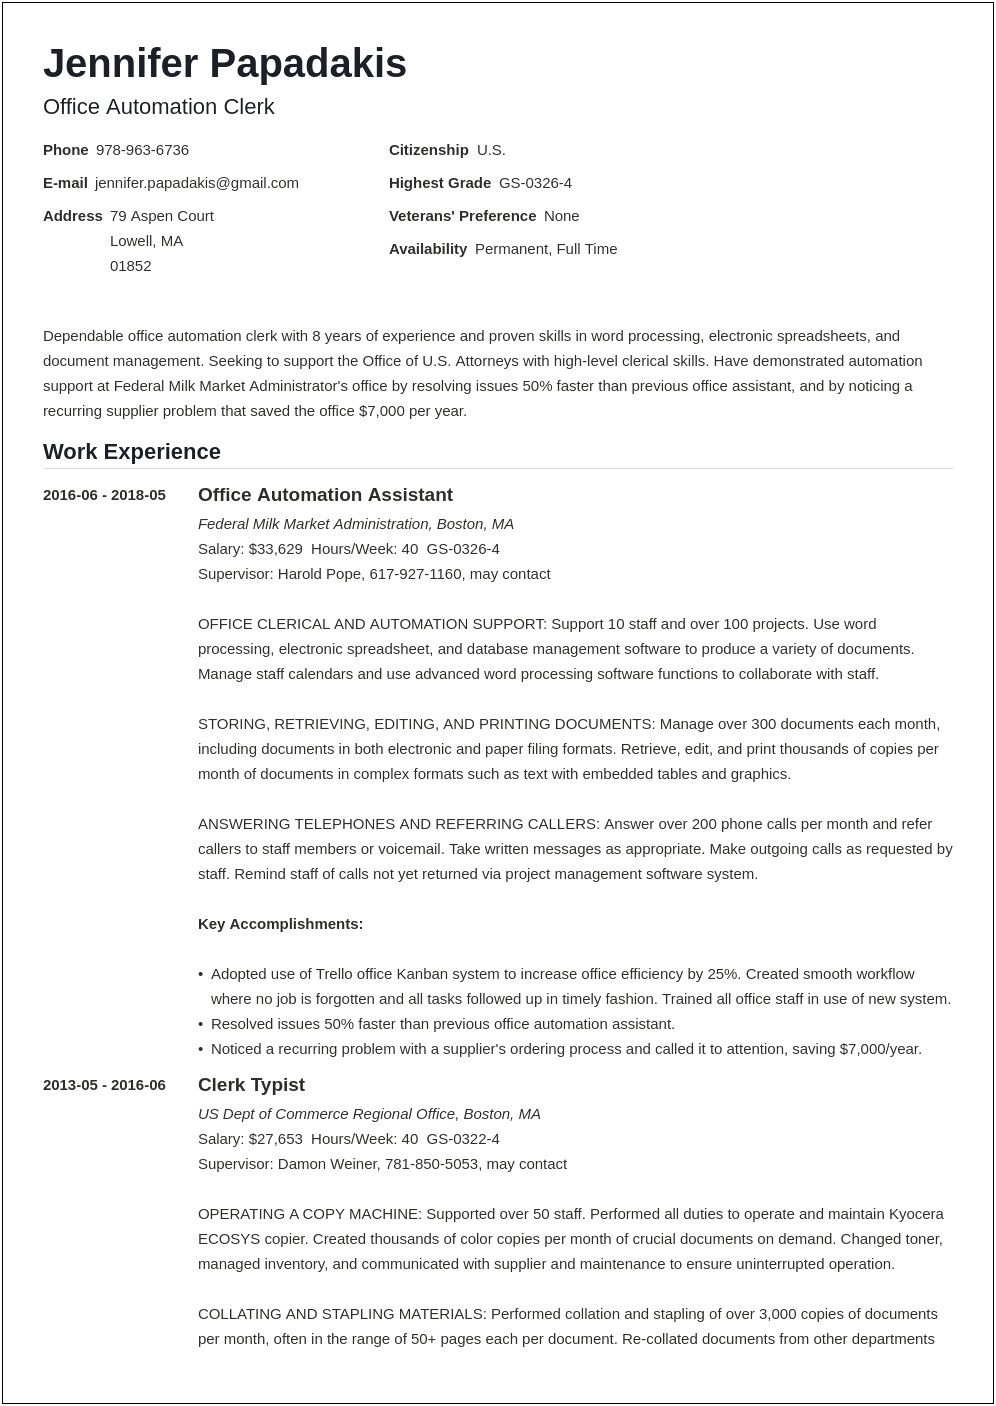 Send Uploaded And Federal Resume For Federal Job